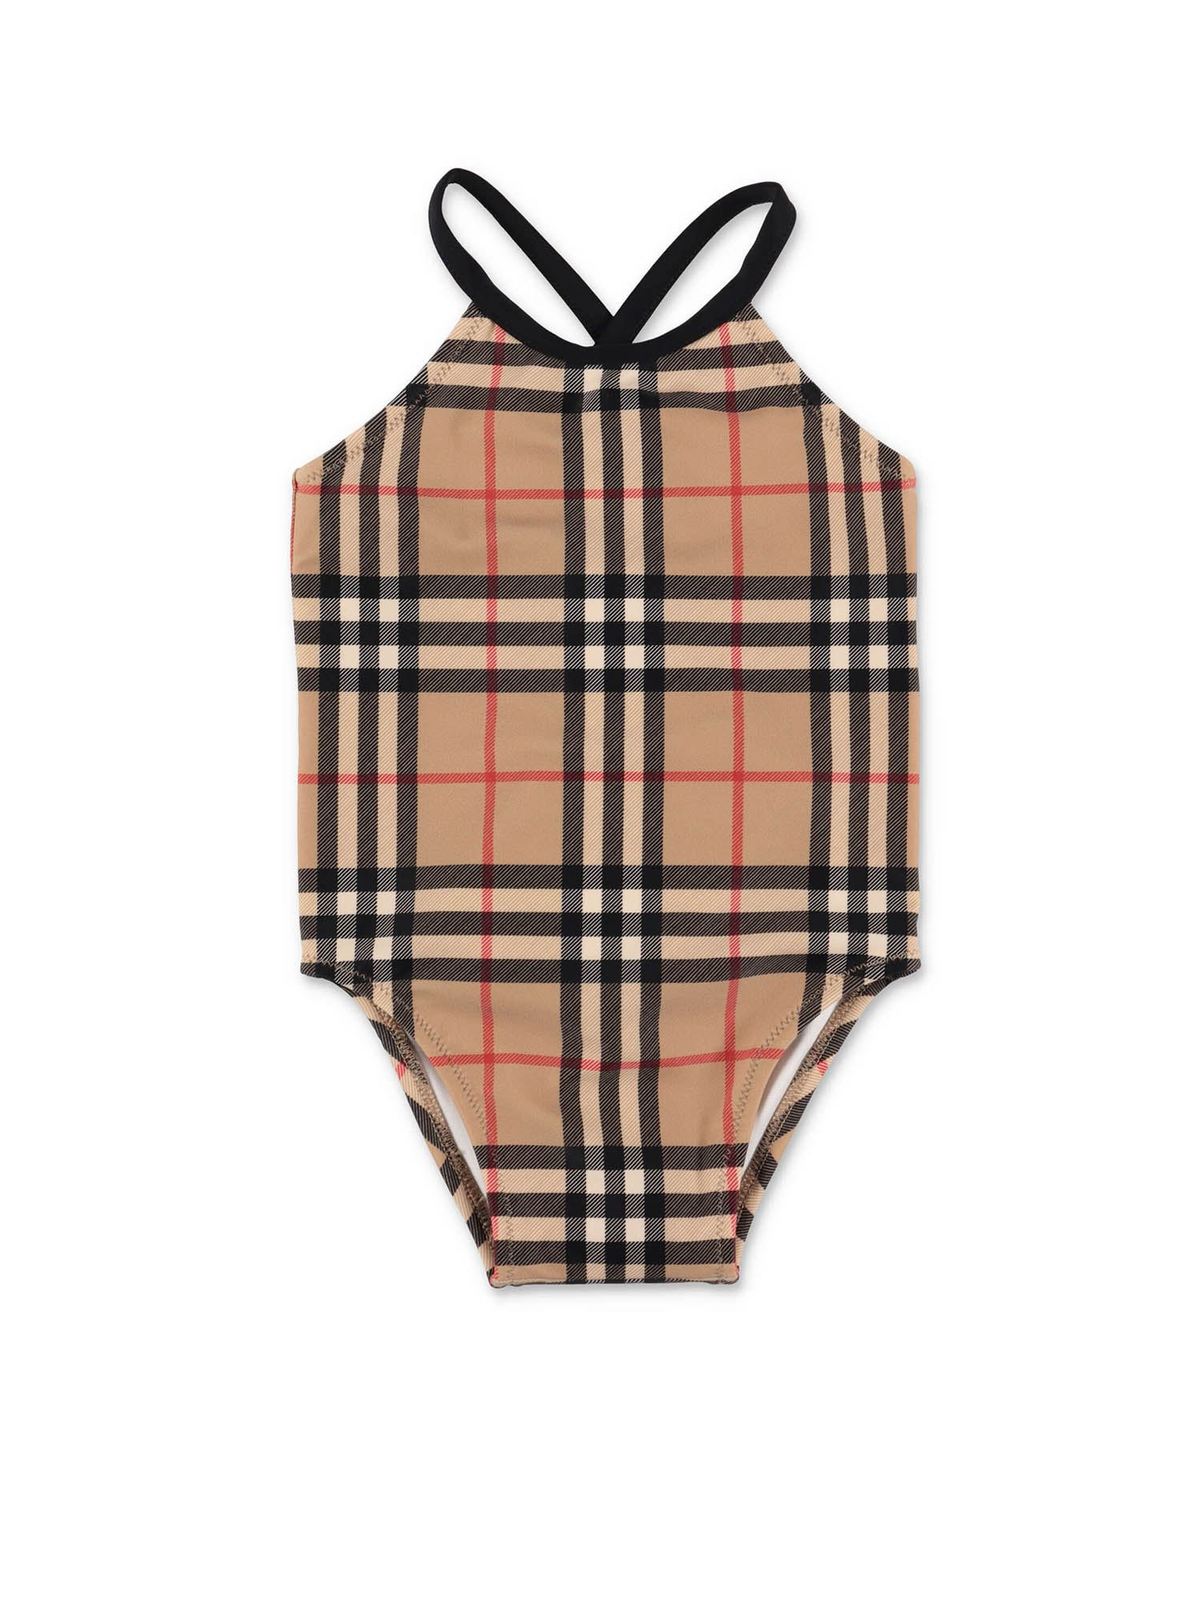 BURBERRY ONE-PIECE SWIMSUIT IN VINTAGE CHECK BEIGE